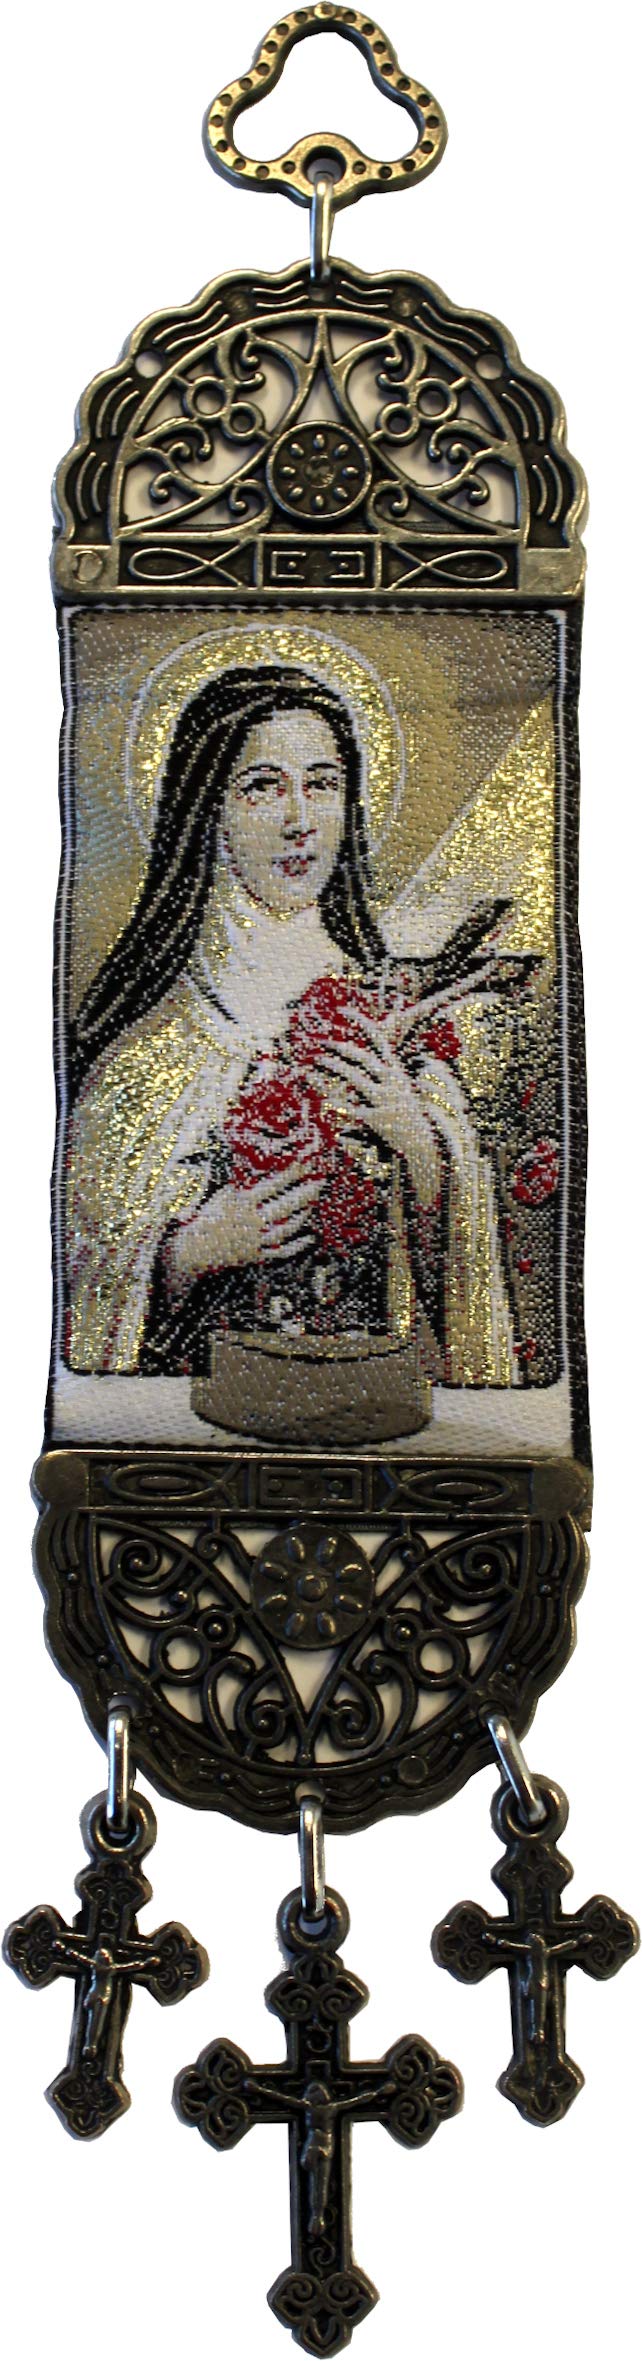 Holy Land Market Wall Hanging Tapestry of Saint Theresa - with Heat Printing on Synthetic Cloth Decorated (8.85 x 2 Inches)